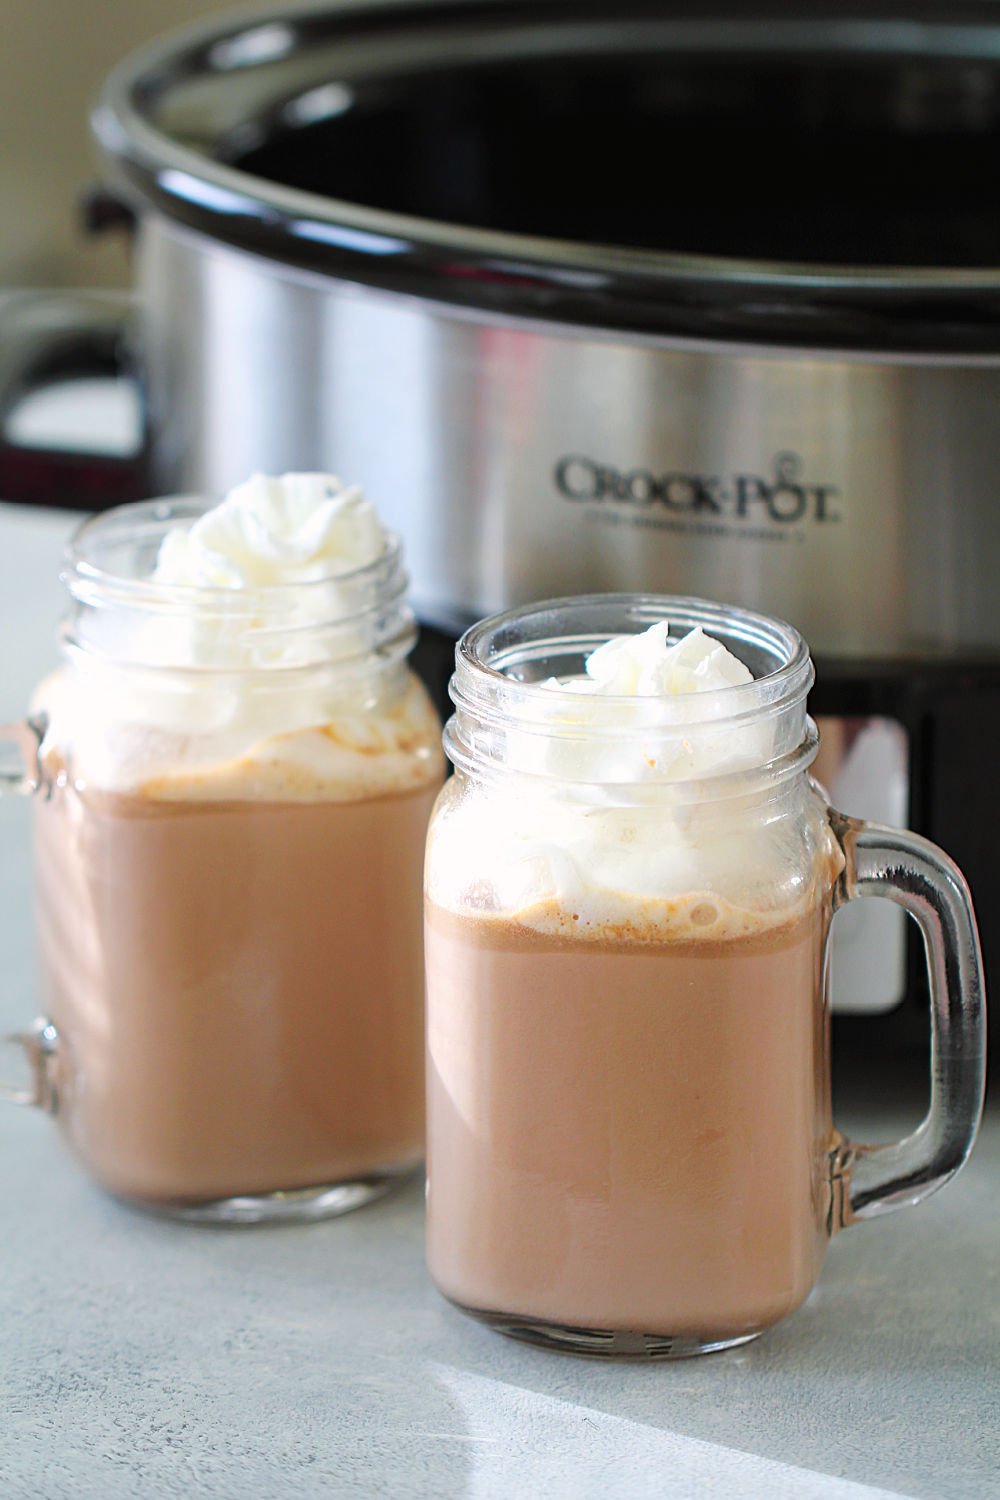 Homemade Slow Cooker Hot Chocolate Recipe (5 Ingredients)